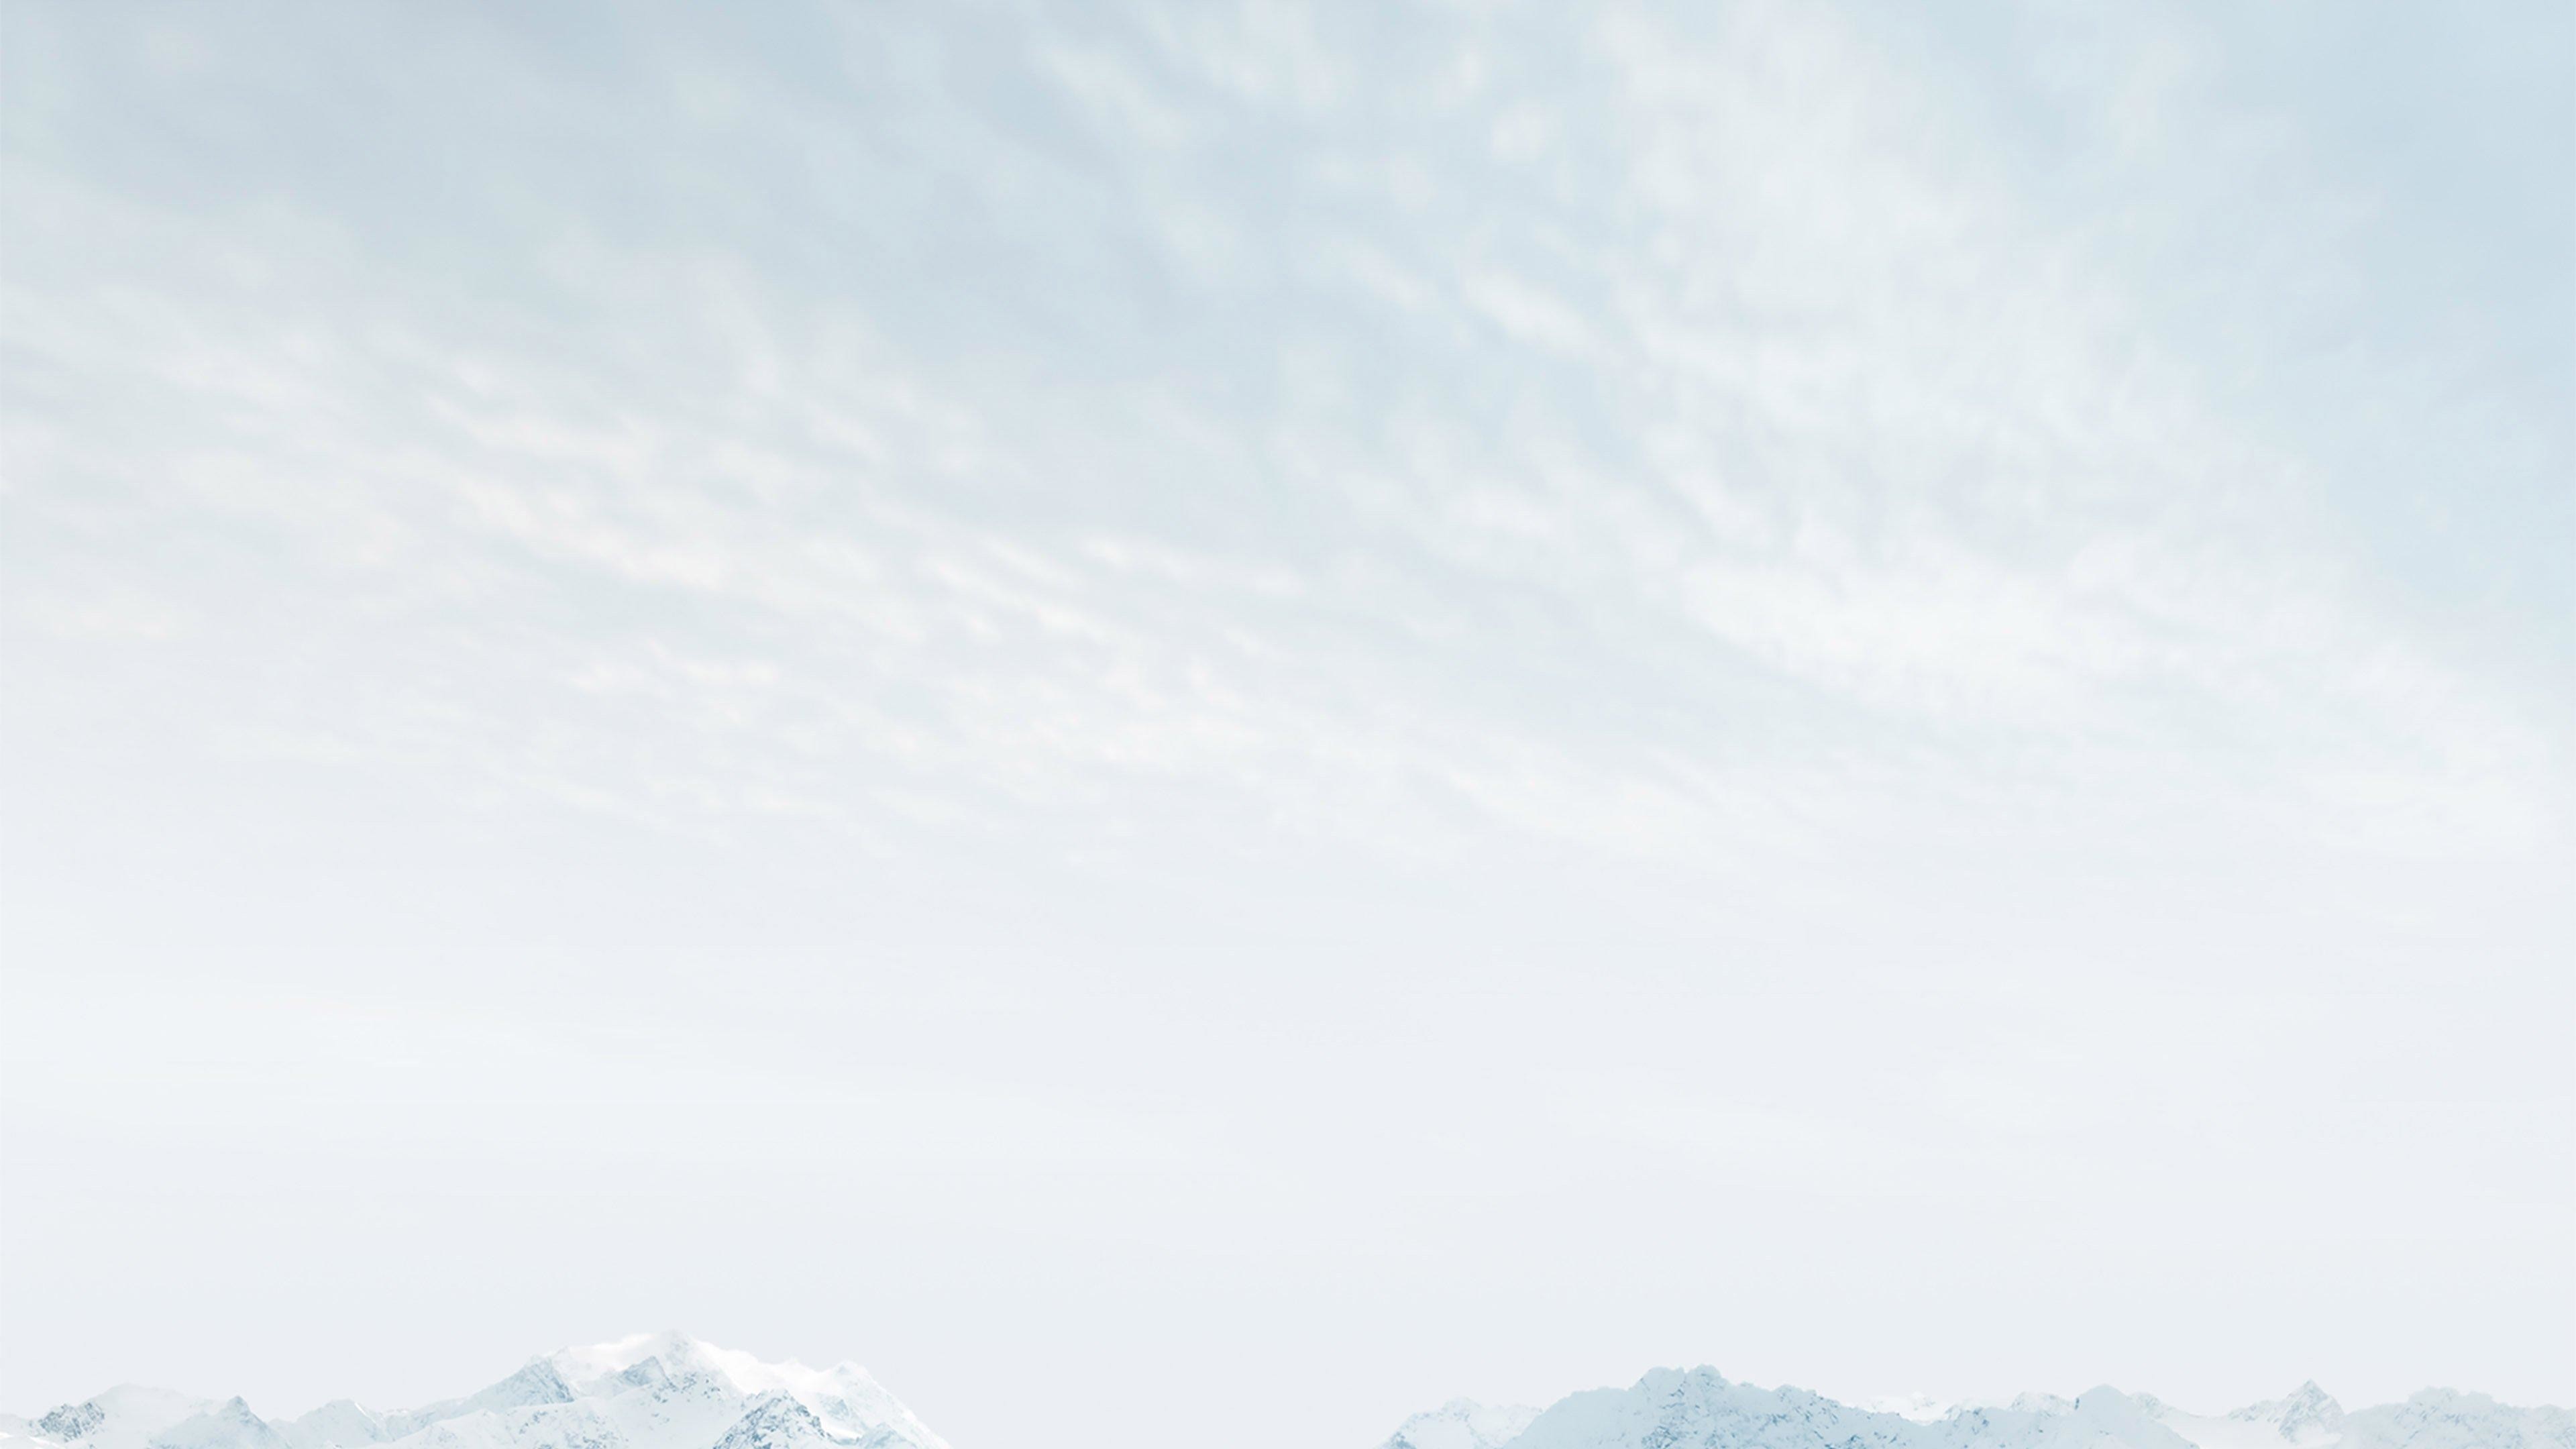 3840x2160 Ad11-wallpaper-snow-mountain-ios8-iphone6-plus-official